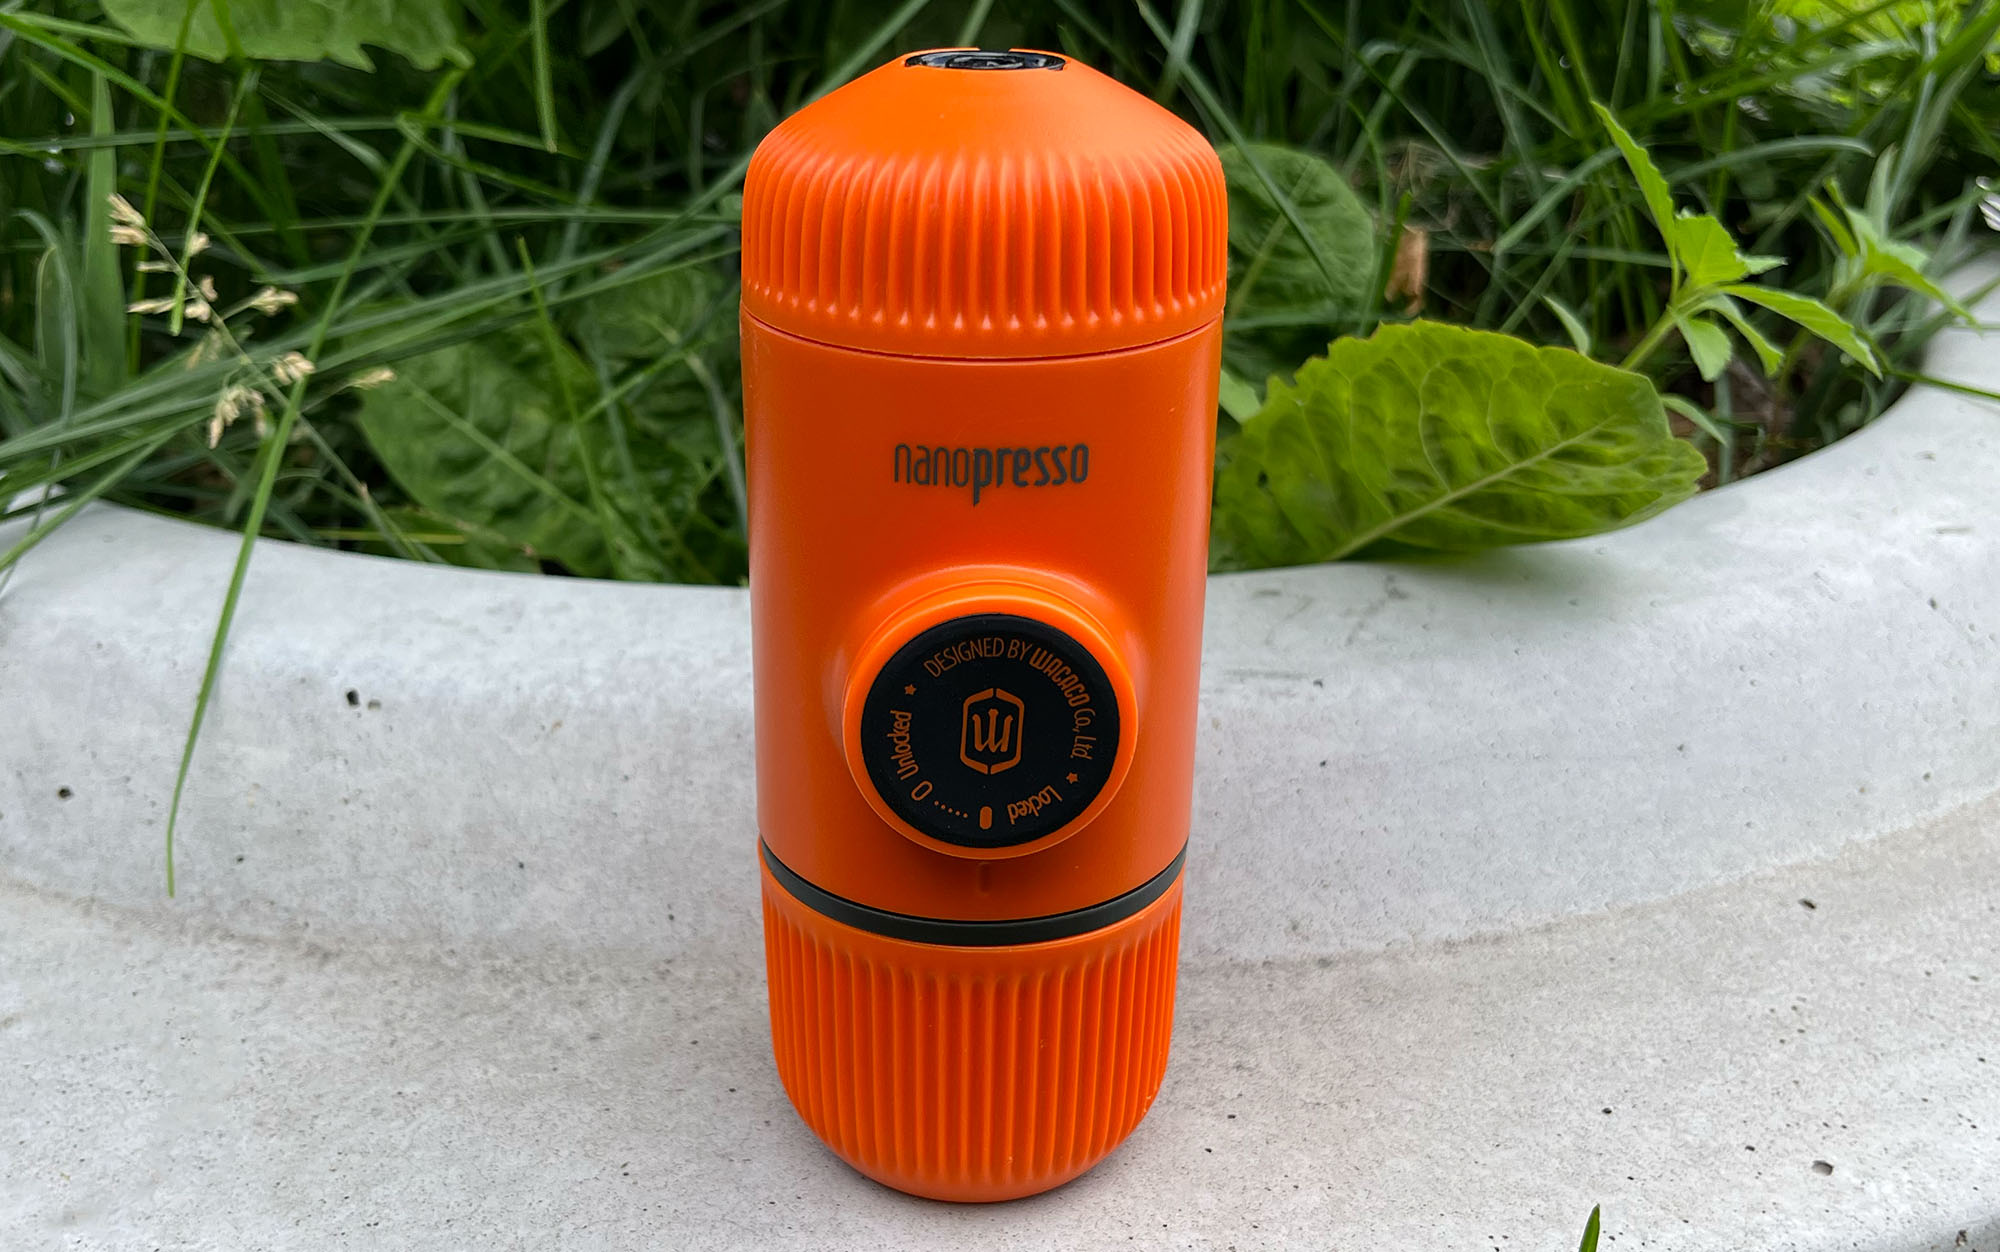 The Wacaco Nanopresso is the best camping coffee maker for espresso.